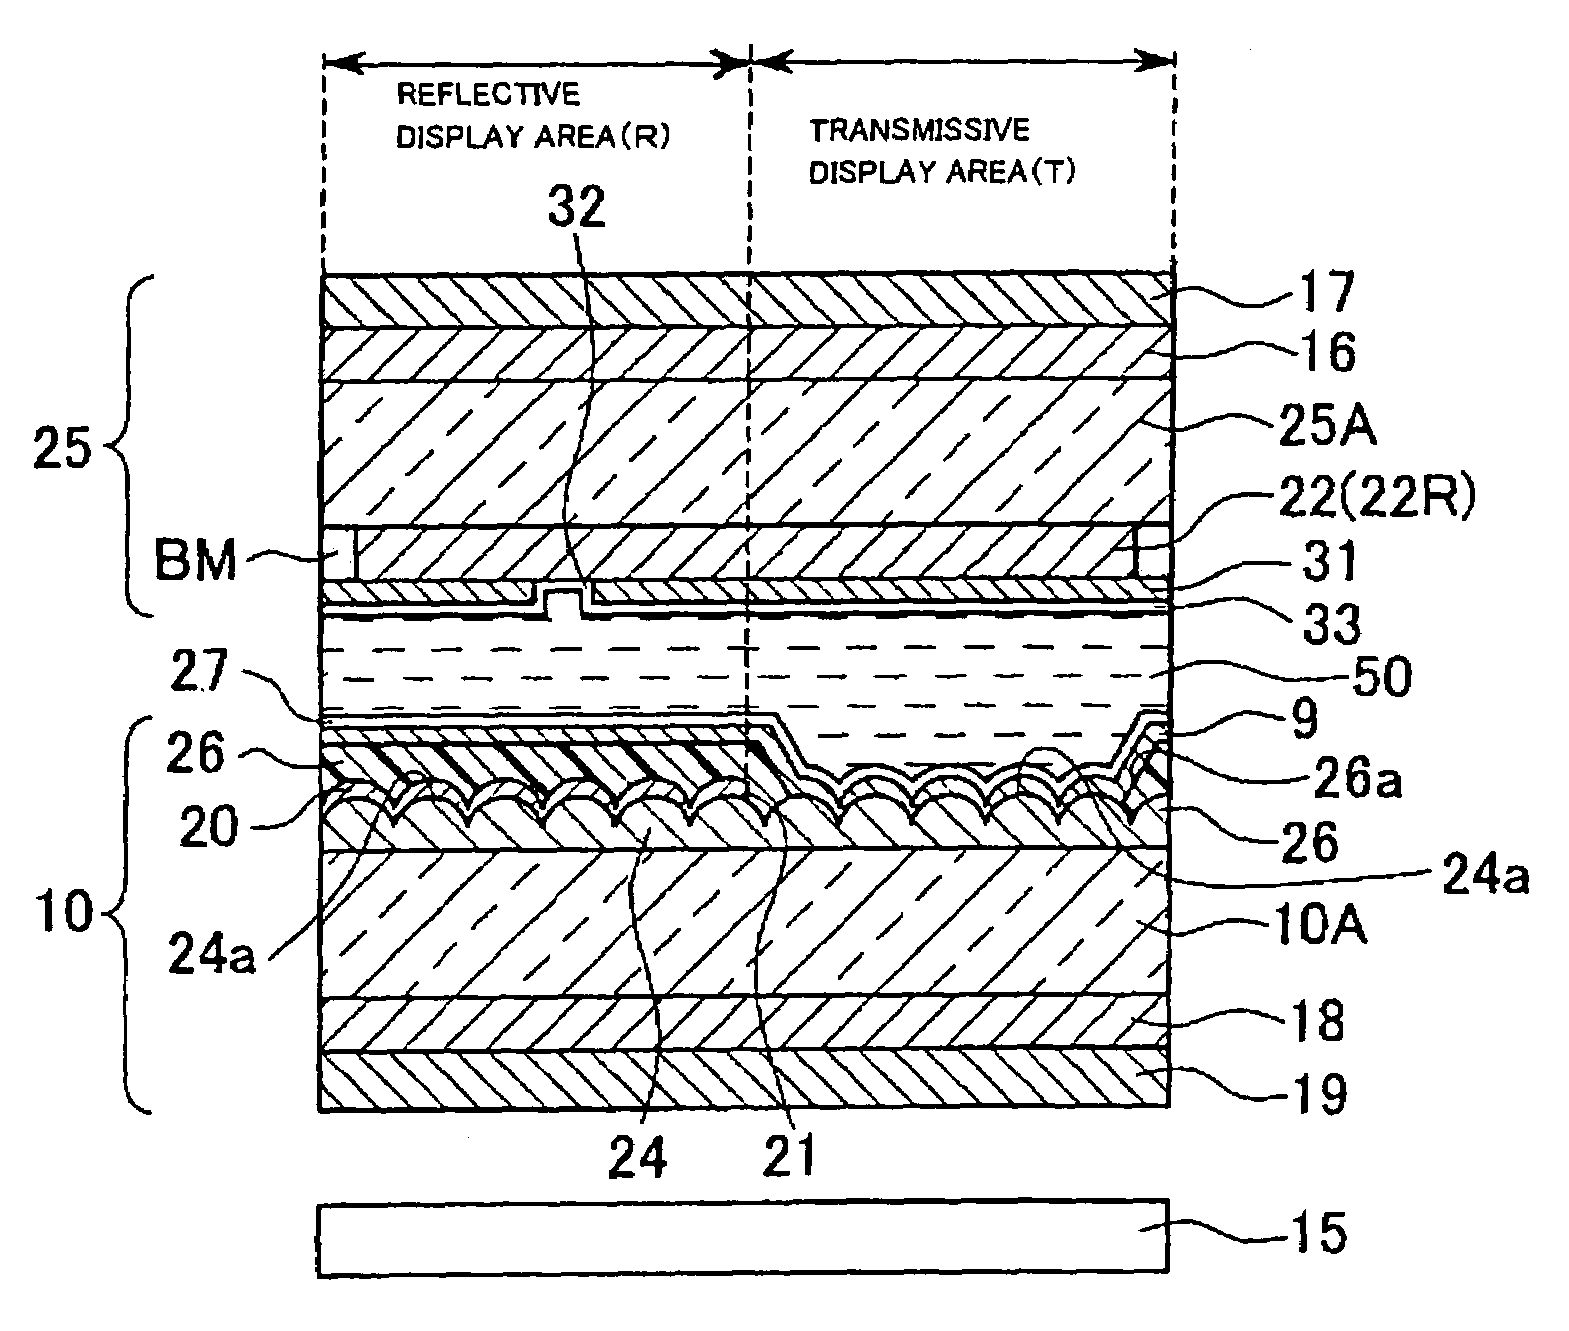 Transflective liquid crystal display device having surface roughness in the transmissive area and homeotropic alignment